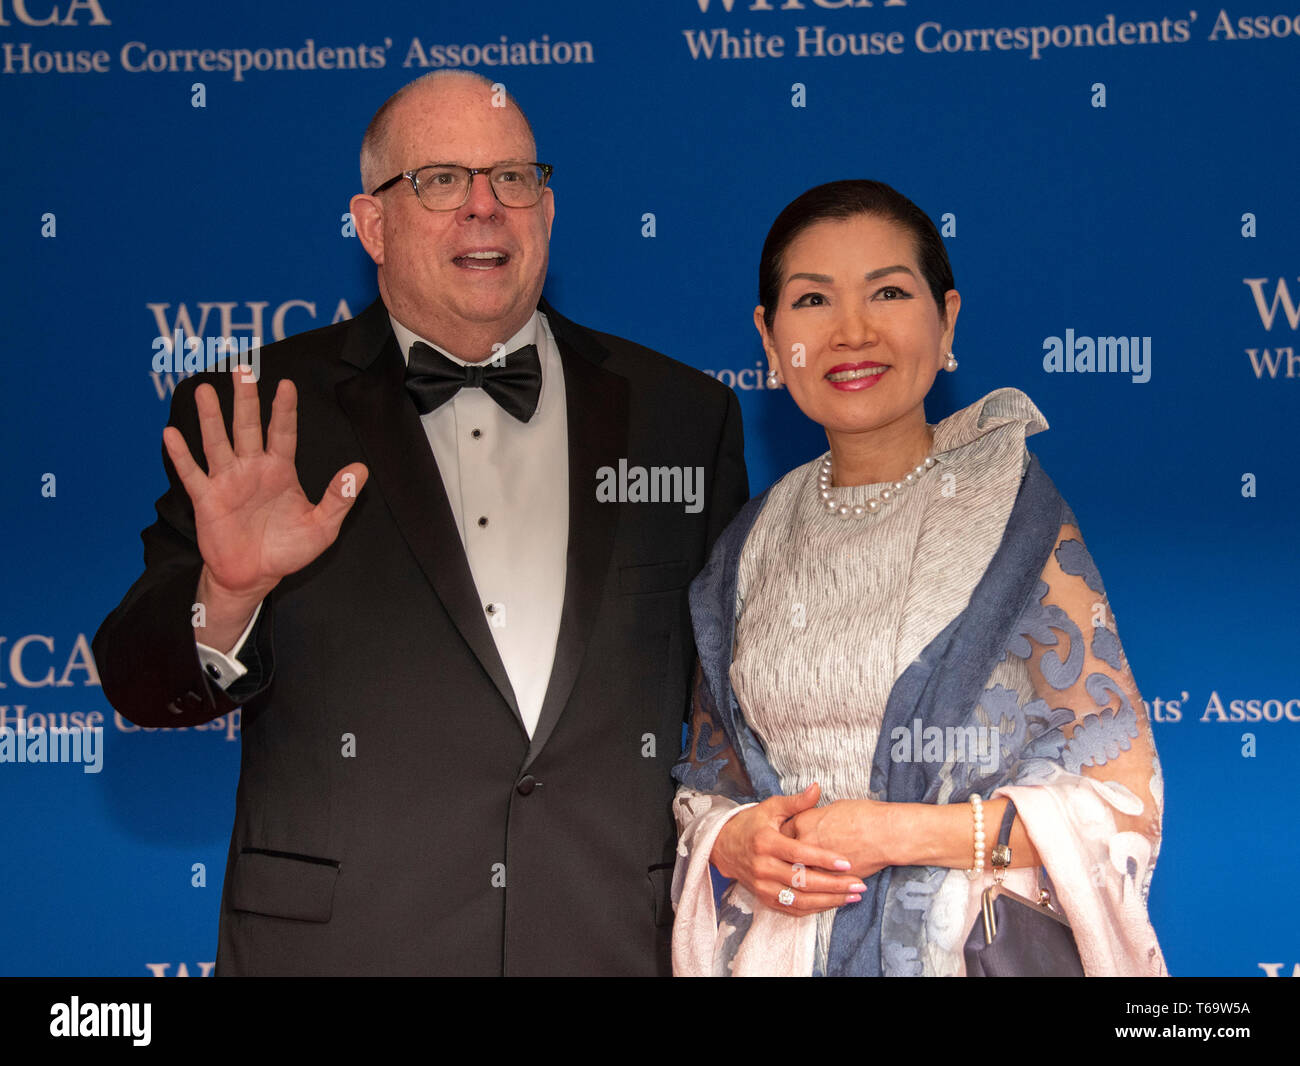 Governor Larry Hogan (Republican of Maryland) and his wife, Yumi, arrive for the 2019 White House Correspondents Association Annual Dinner at the Washington Hilton Hotel on Saturday, April 27, 2019. Credit: Ron Sachs/CNP (RESTRICTION: NO New York or New Jersey Newspapers or newspapers within a 75 mile radius of New York City) | usage worldwide Stock Photo